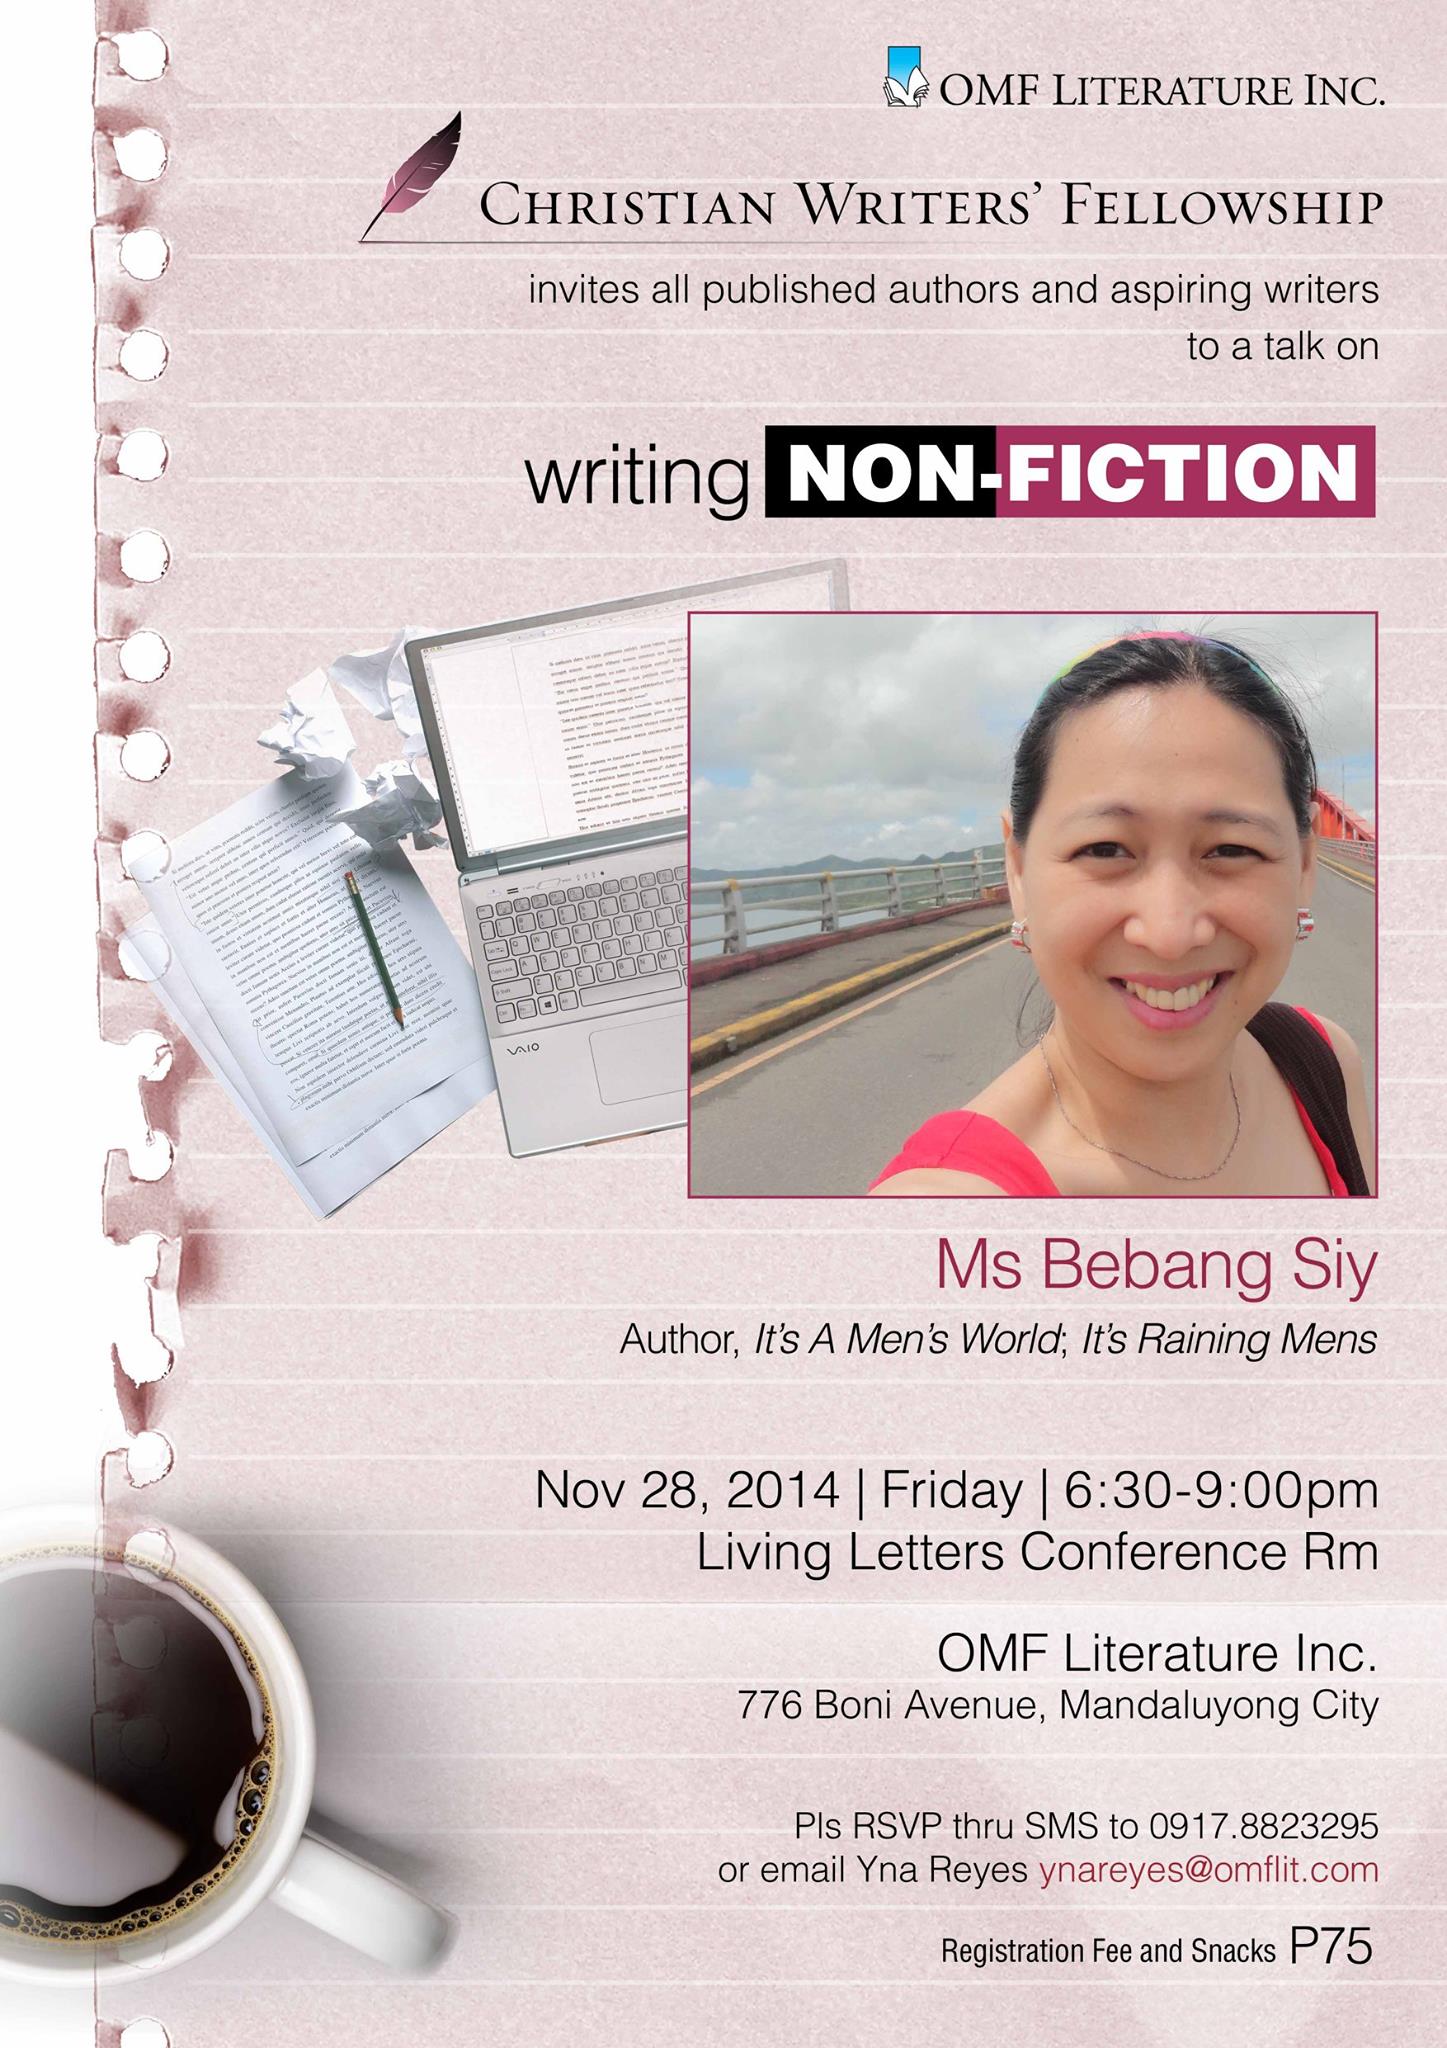 Yna Reyes ATTENTION: WRITERS! This event is for you